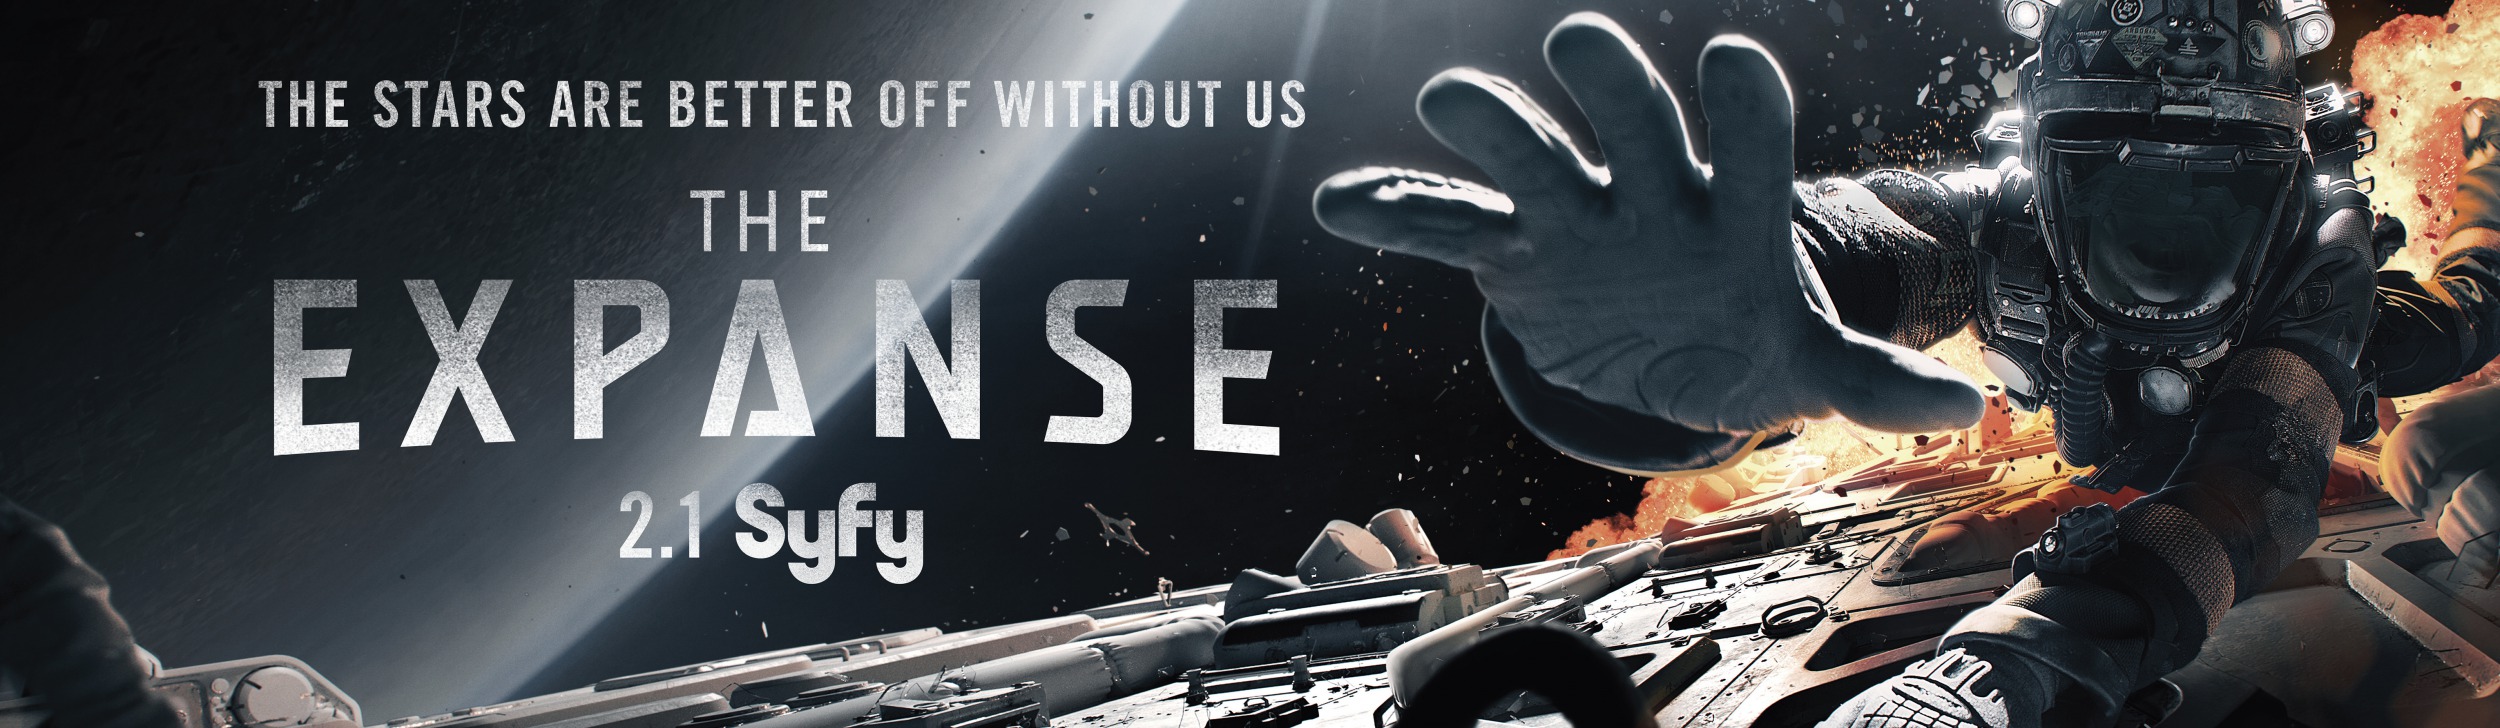 Mega Sized TV Poster Image for The Expanse (#3 of 18)